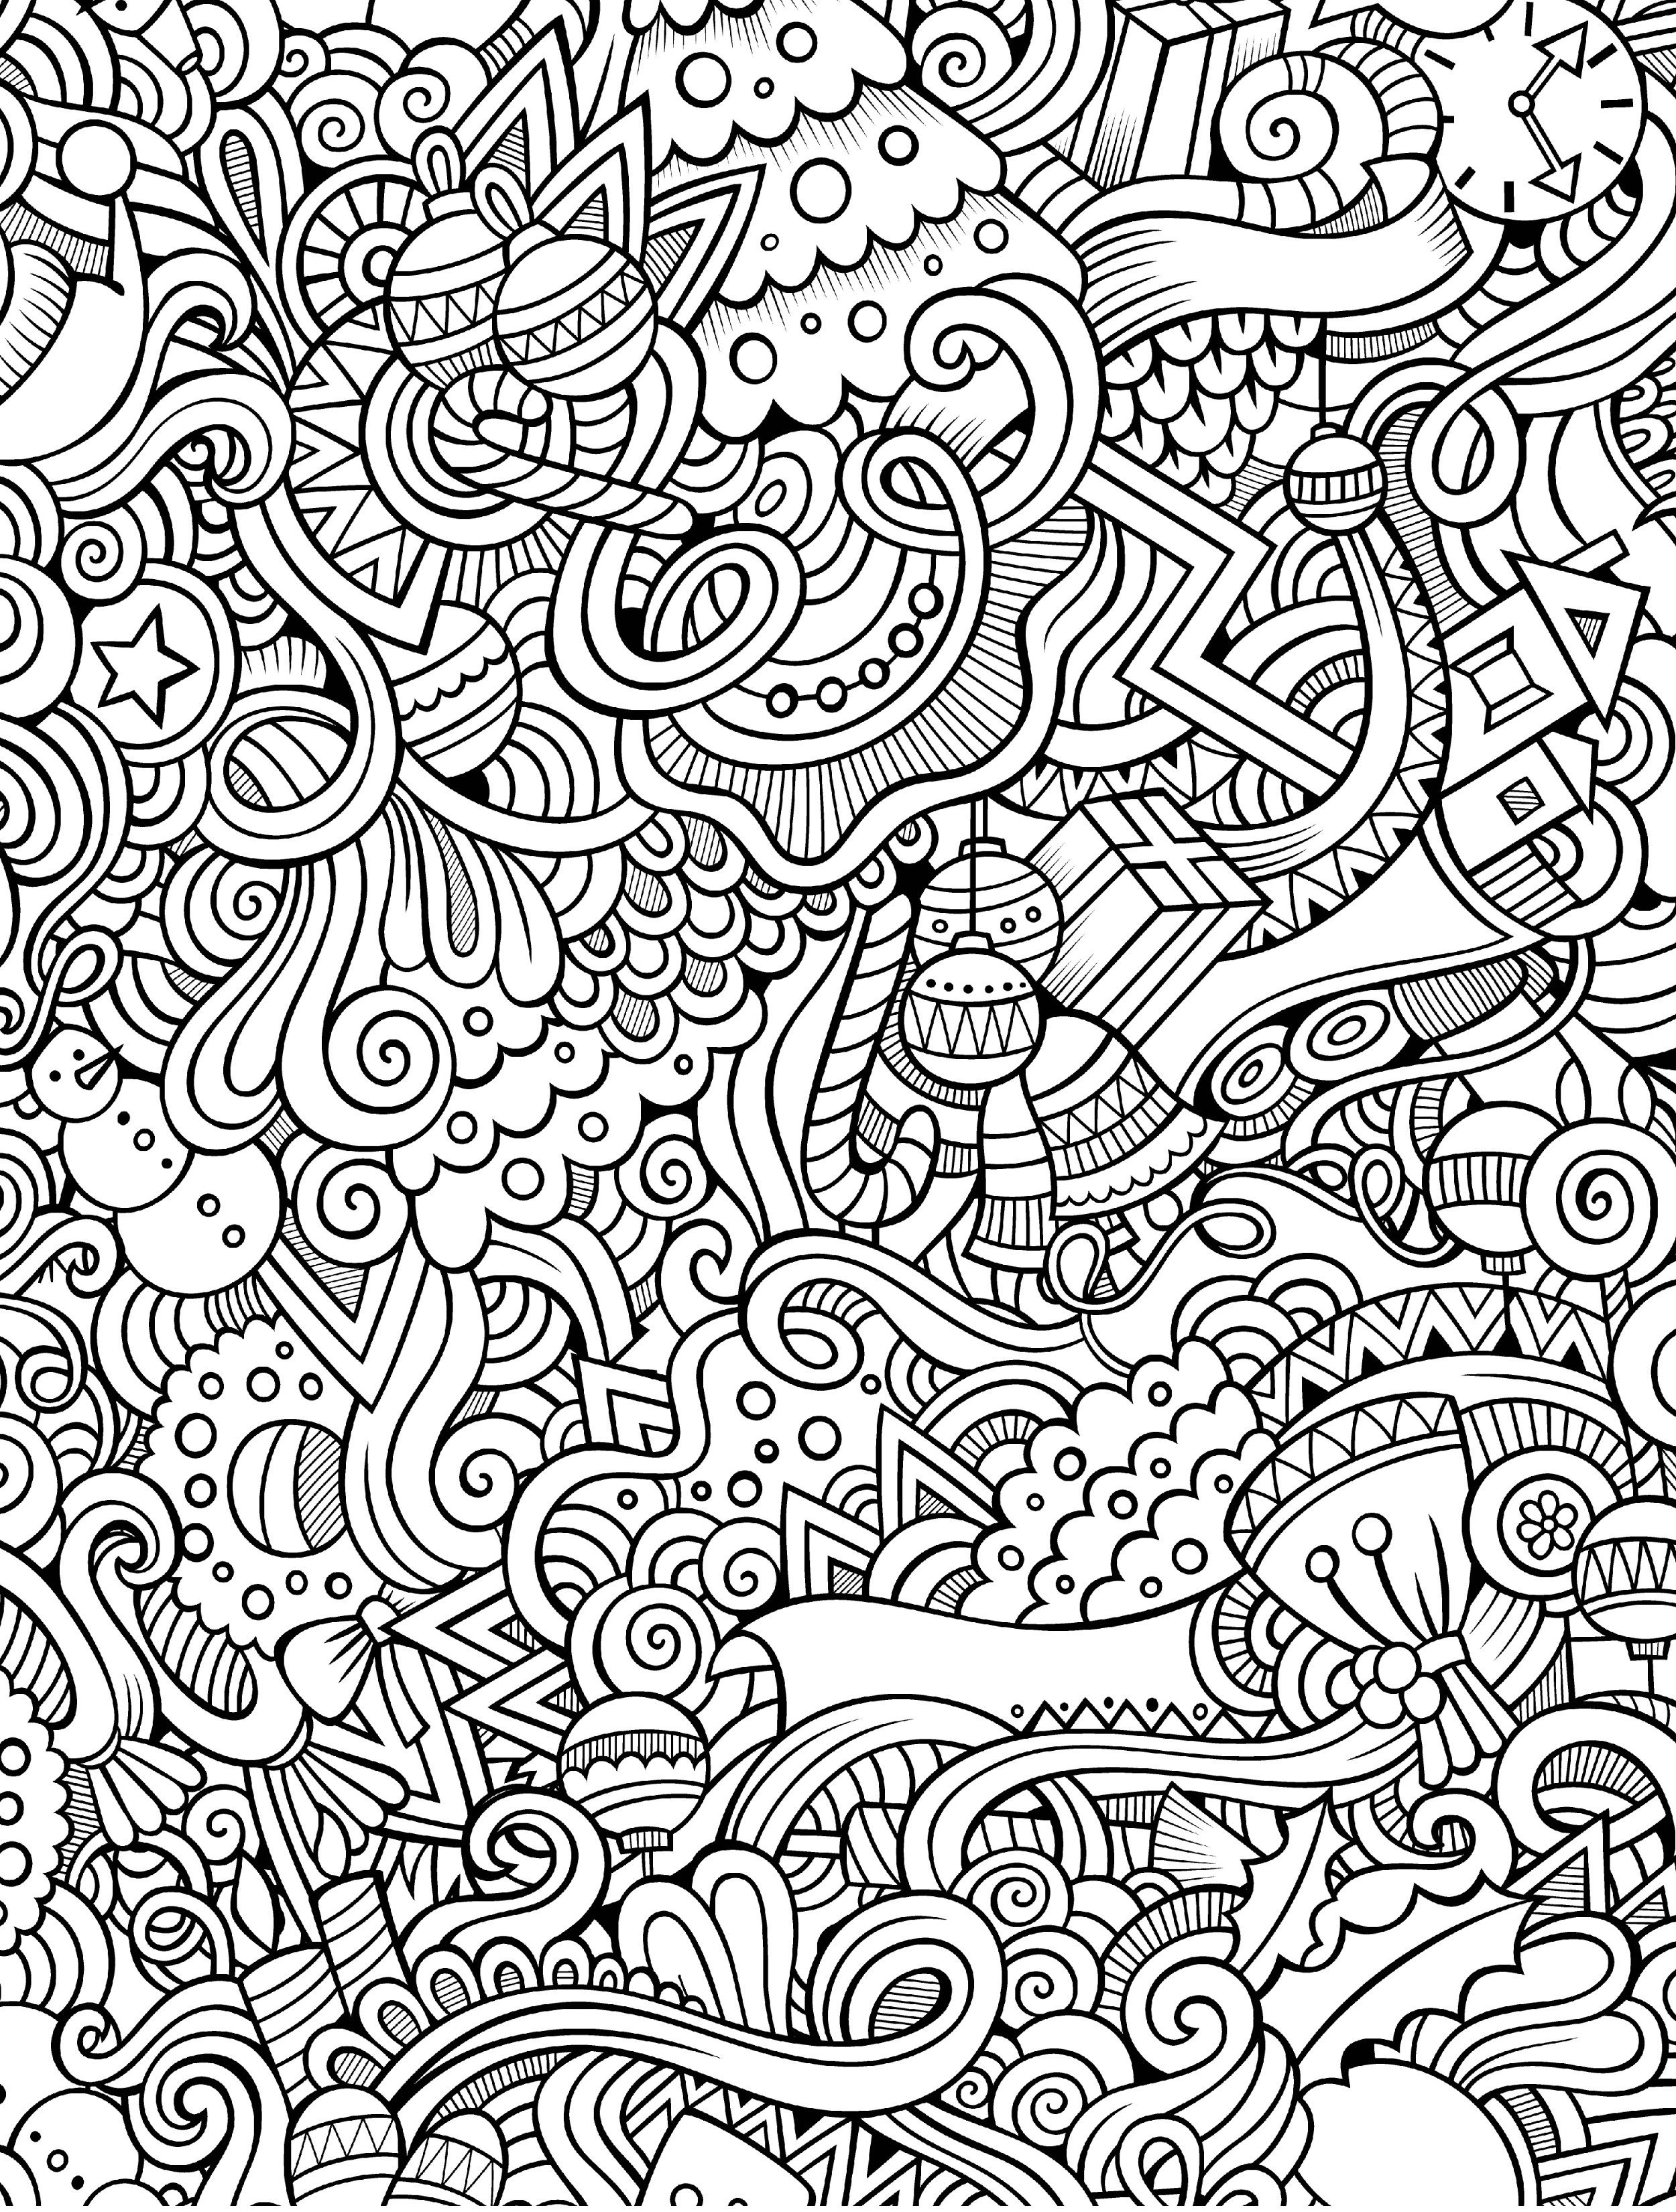 10 Free Printable Holiday Adult Coloring Pages - Free Printable Coloring Sheets